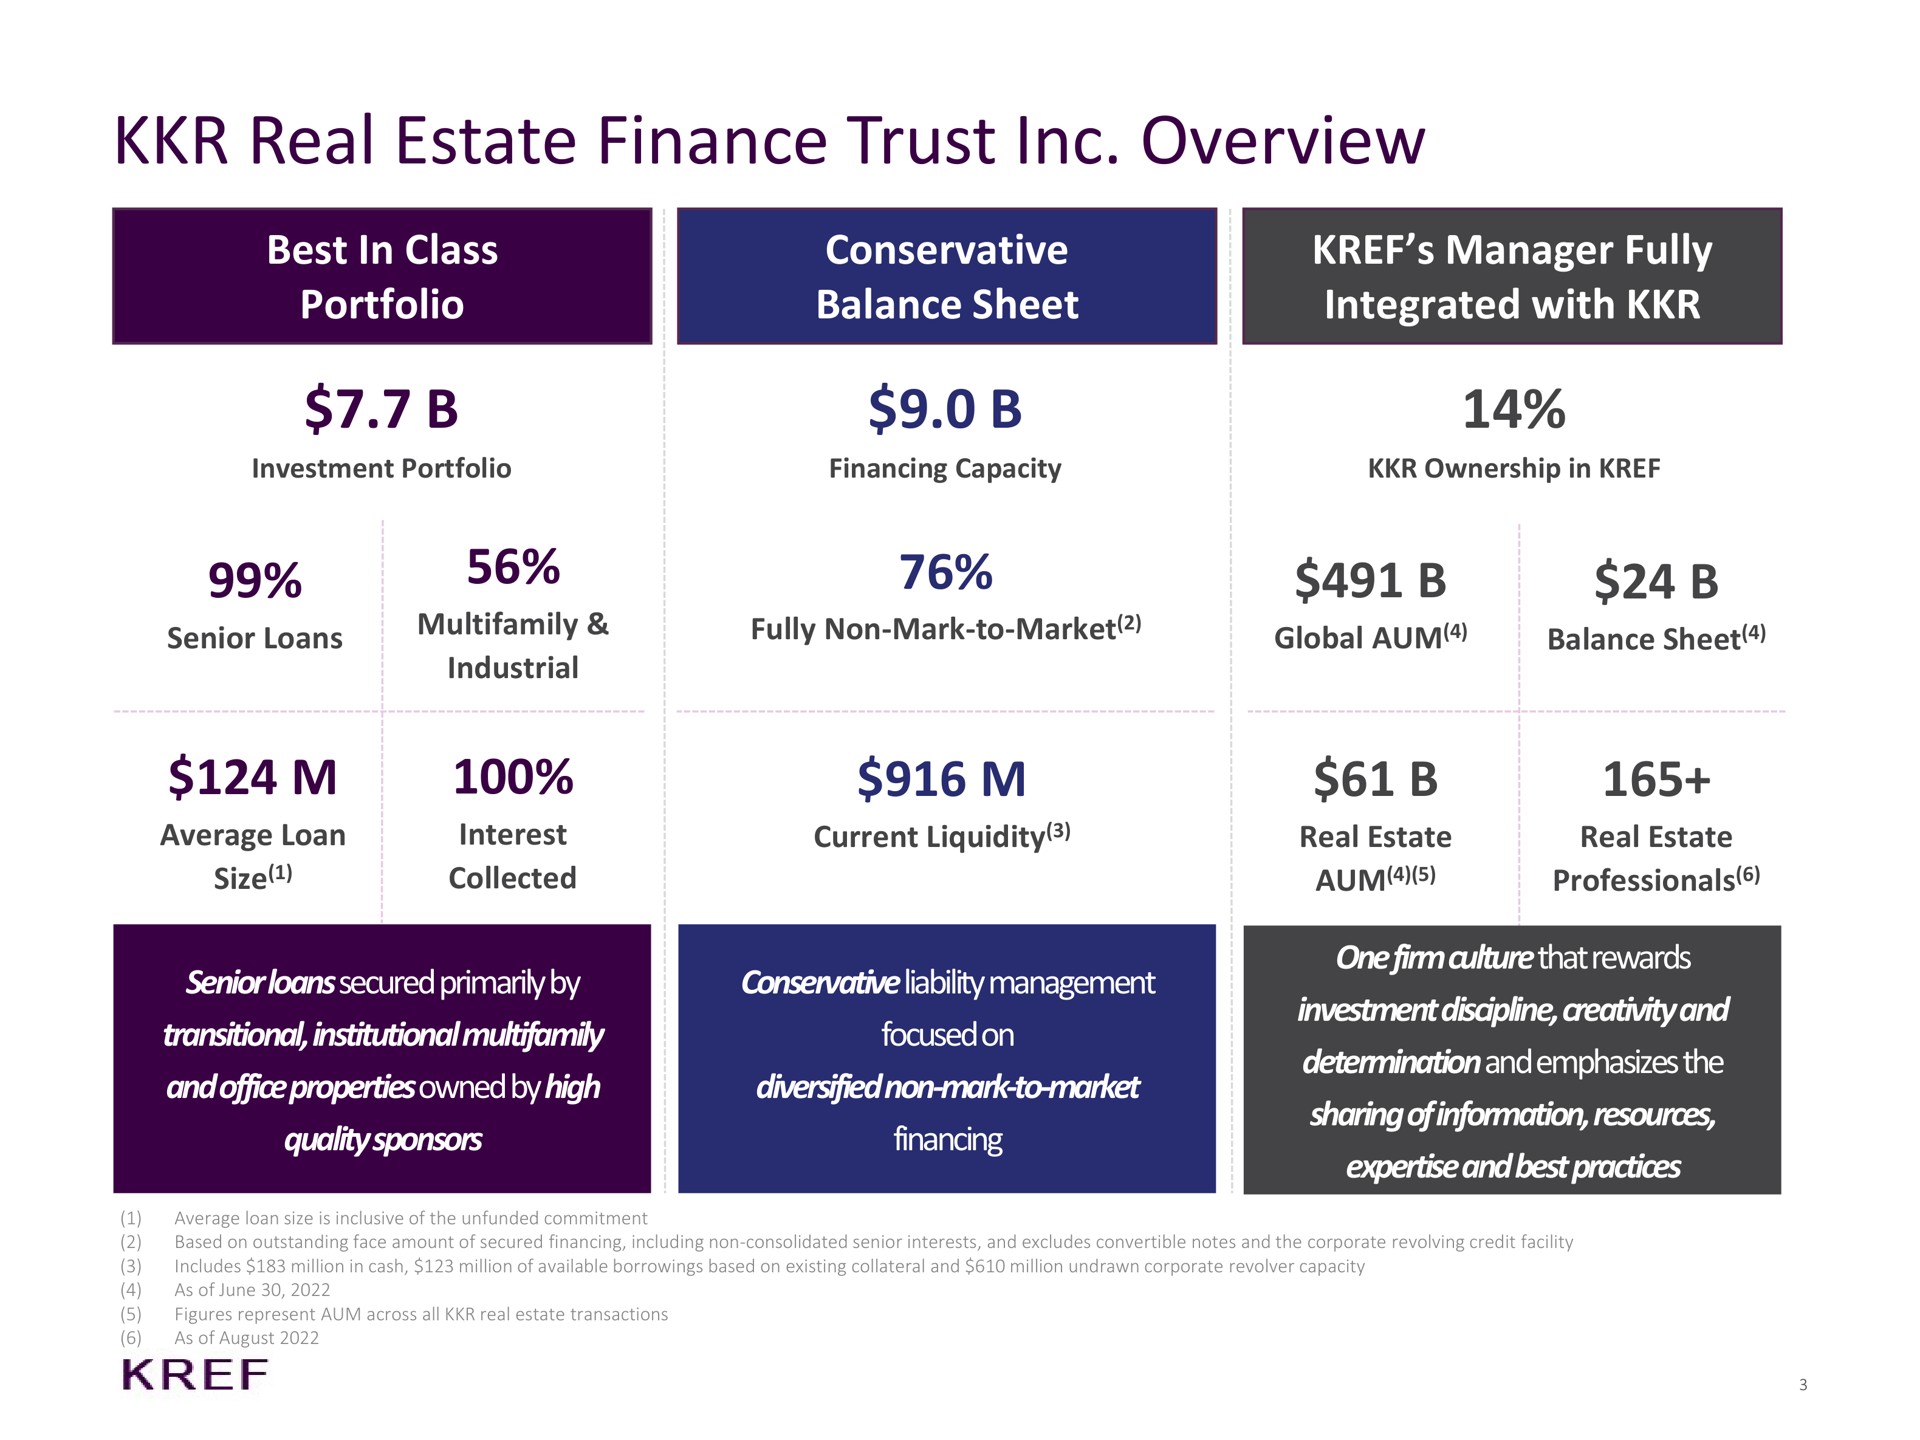 real estate finance trust overview best in class portfolio conservative balance sheet manager fully integrated with senior loans secured primarily by transitional institutional and office properties owned by high quality sponsors management focused on diversified non mark to market financing one firm rewards investment discipline creativity and determination and emphasizes the sharing of information resources and best practices average loan size interest collected eel global aum current liquidity aum professionals liability culture that ins | KKR Real Estate Finance Trust